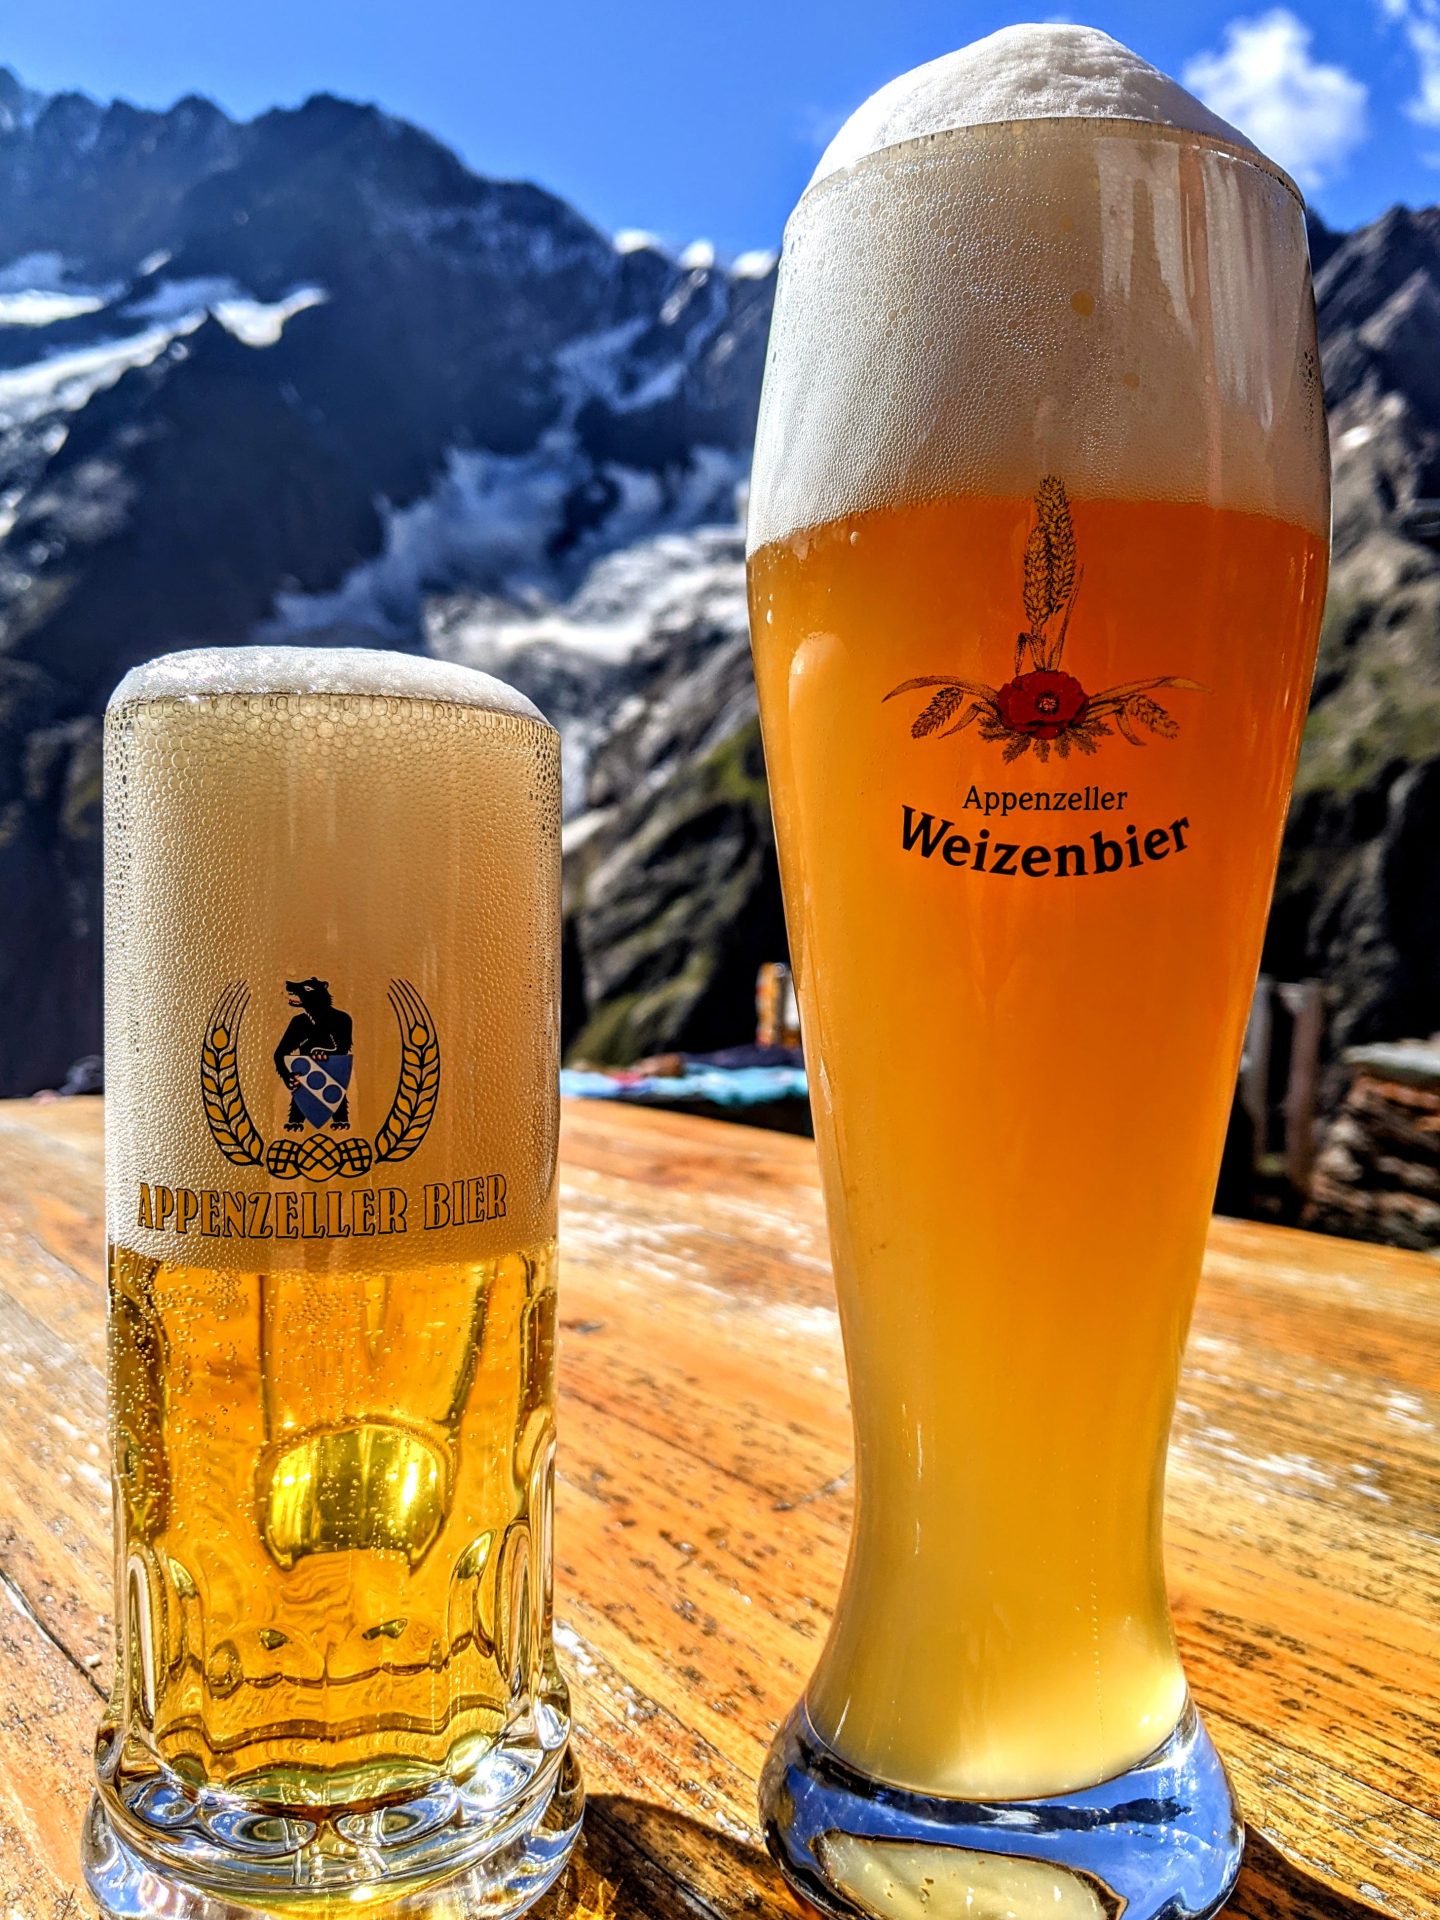 Swiss beer can be found at huts in the Alps